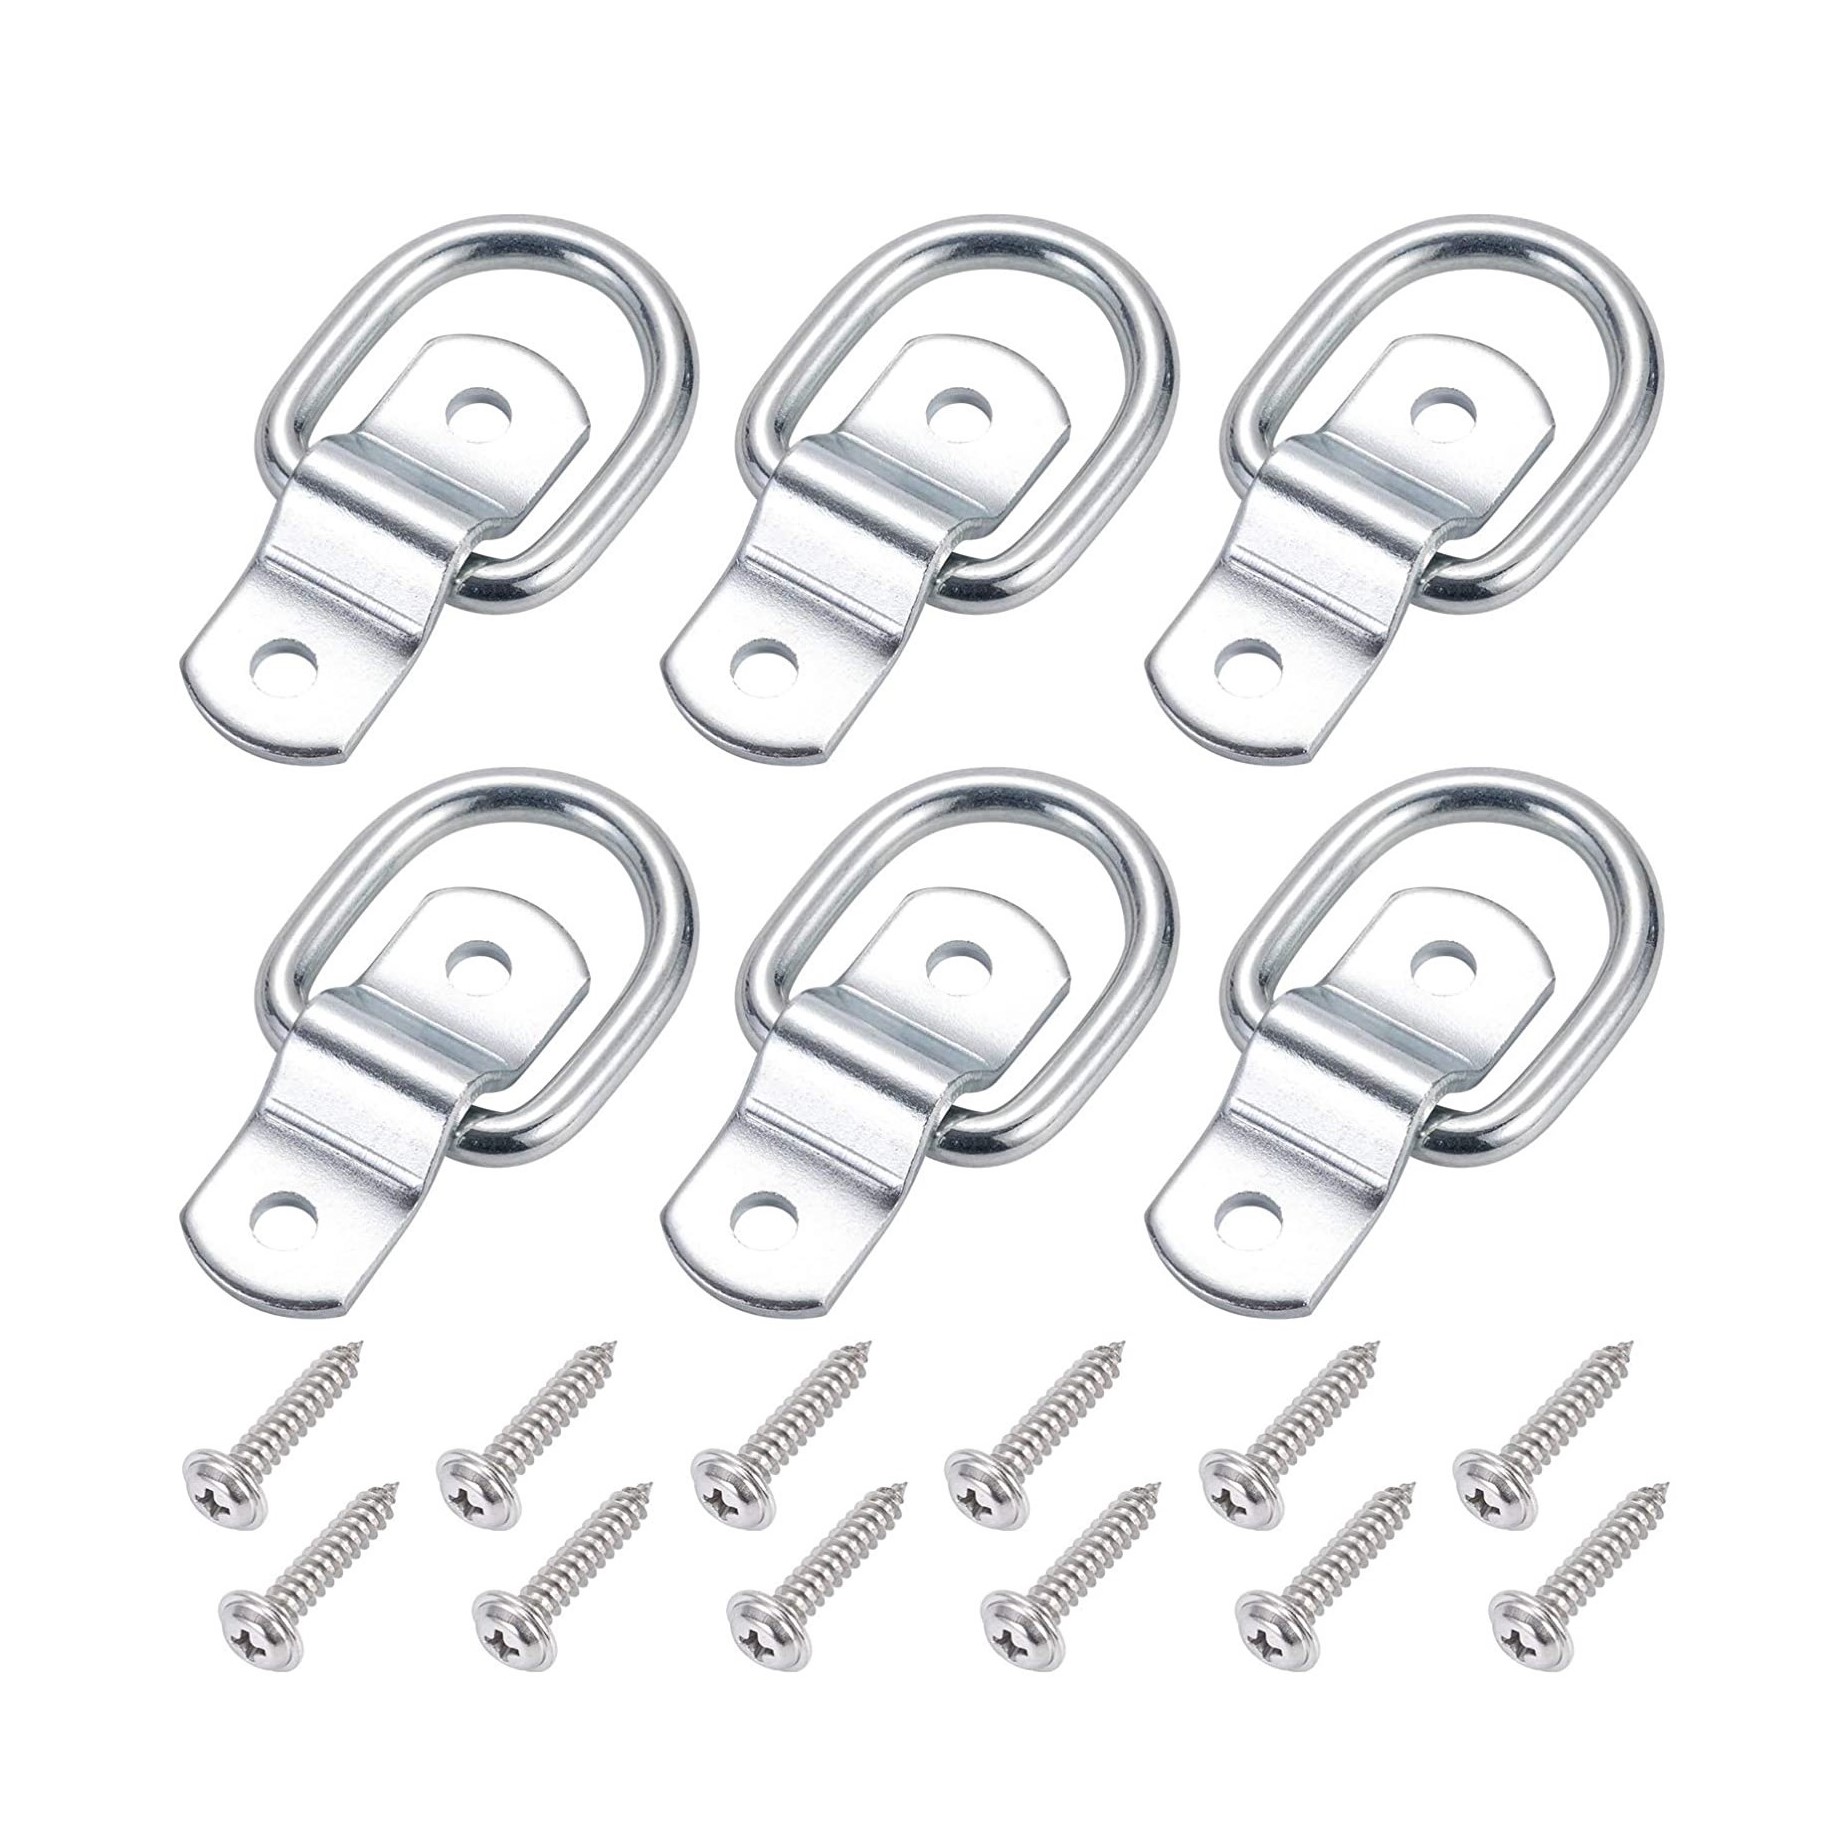 5-Pack Lashing Rings D Ring Strap Tie Down Load Anchor Trailer Pivoting Buckle 